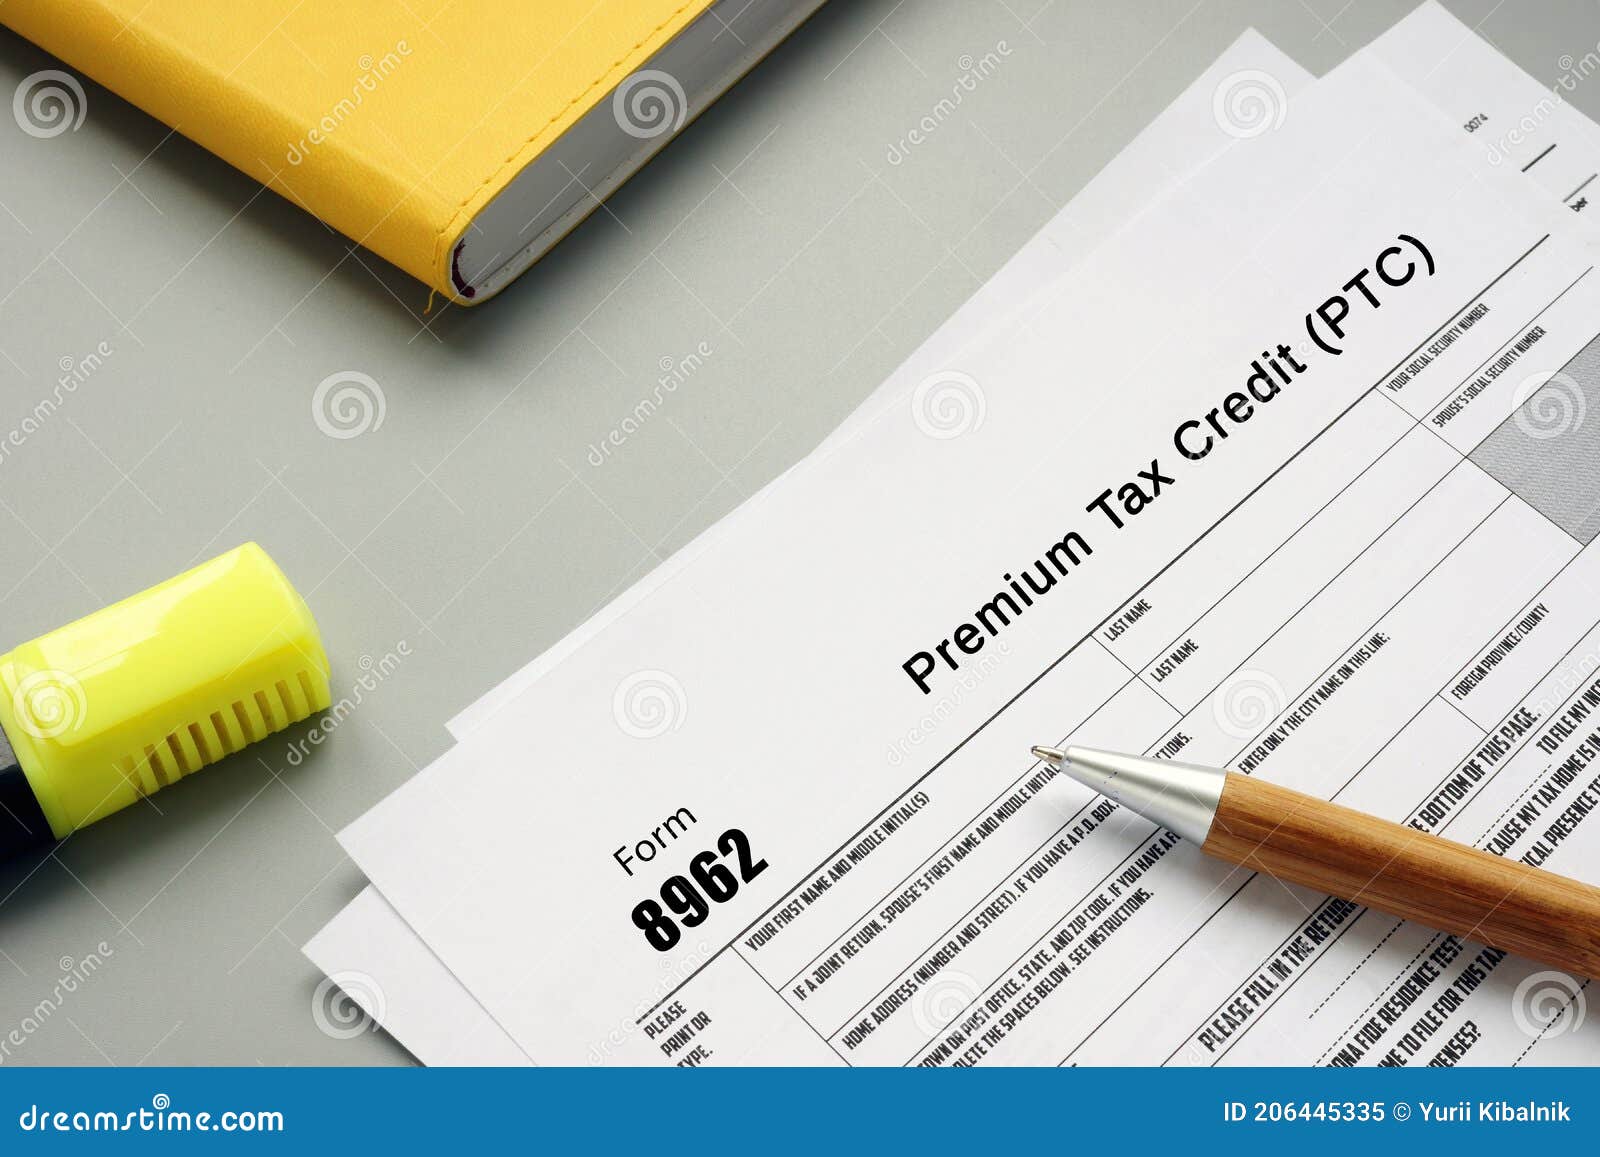 business concept meaning form 8962 premium tax credit ptc with inscription on the page